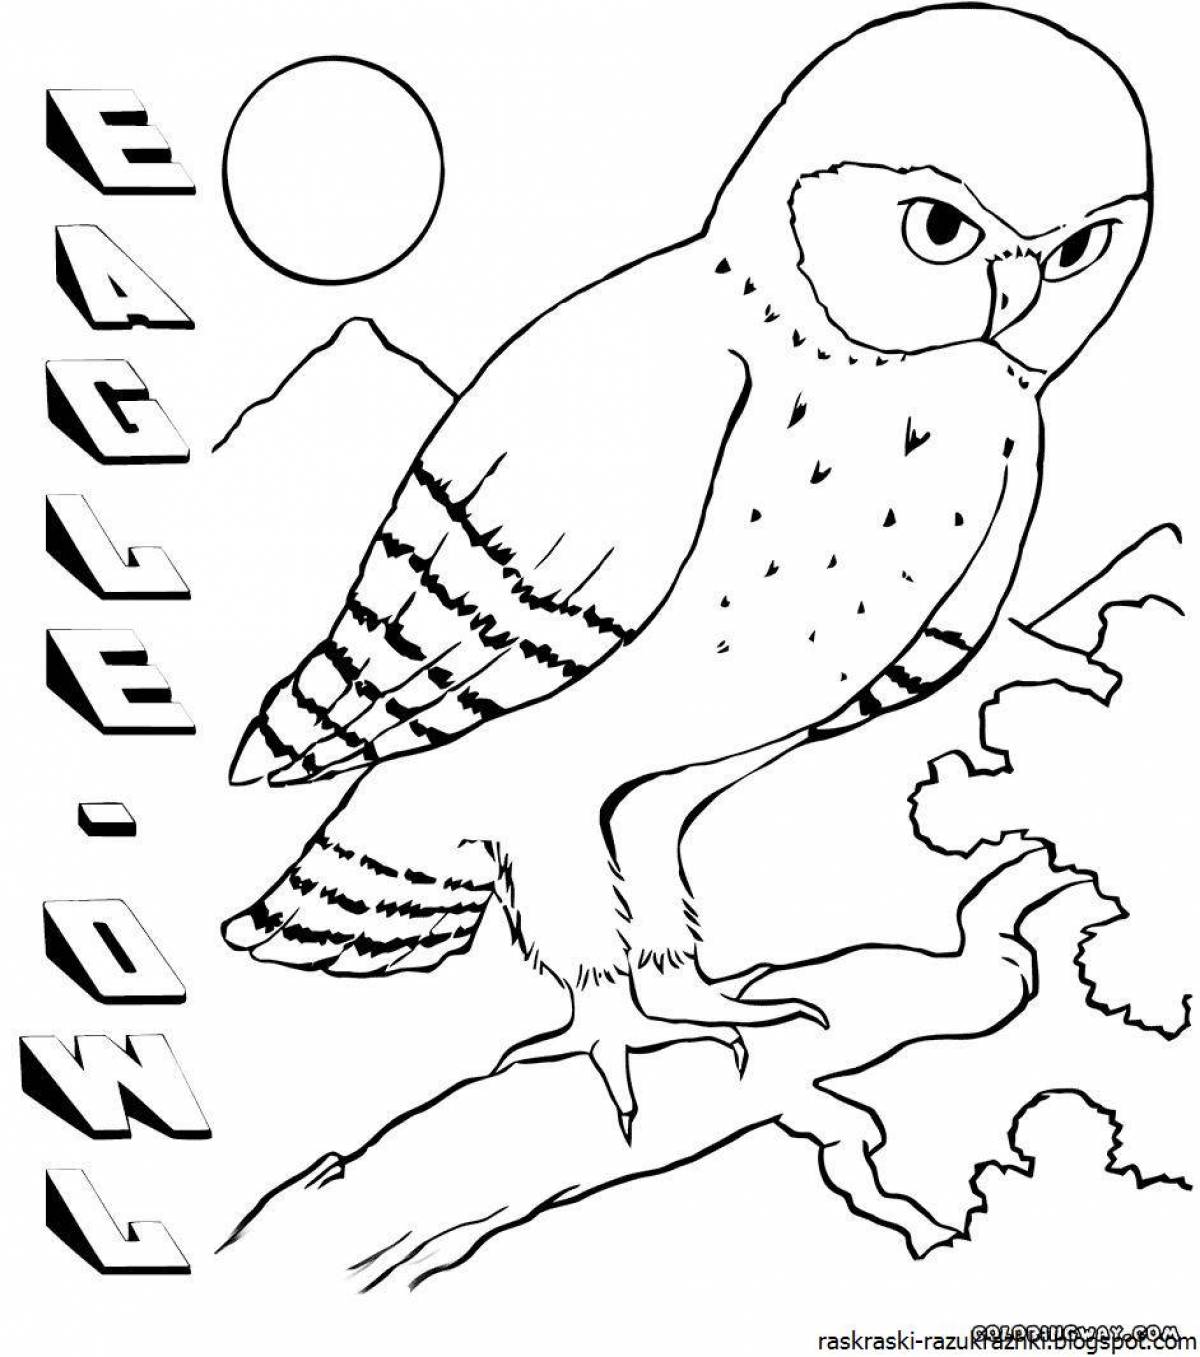 Coloring book luminous wintering birds for children 4-5 years old